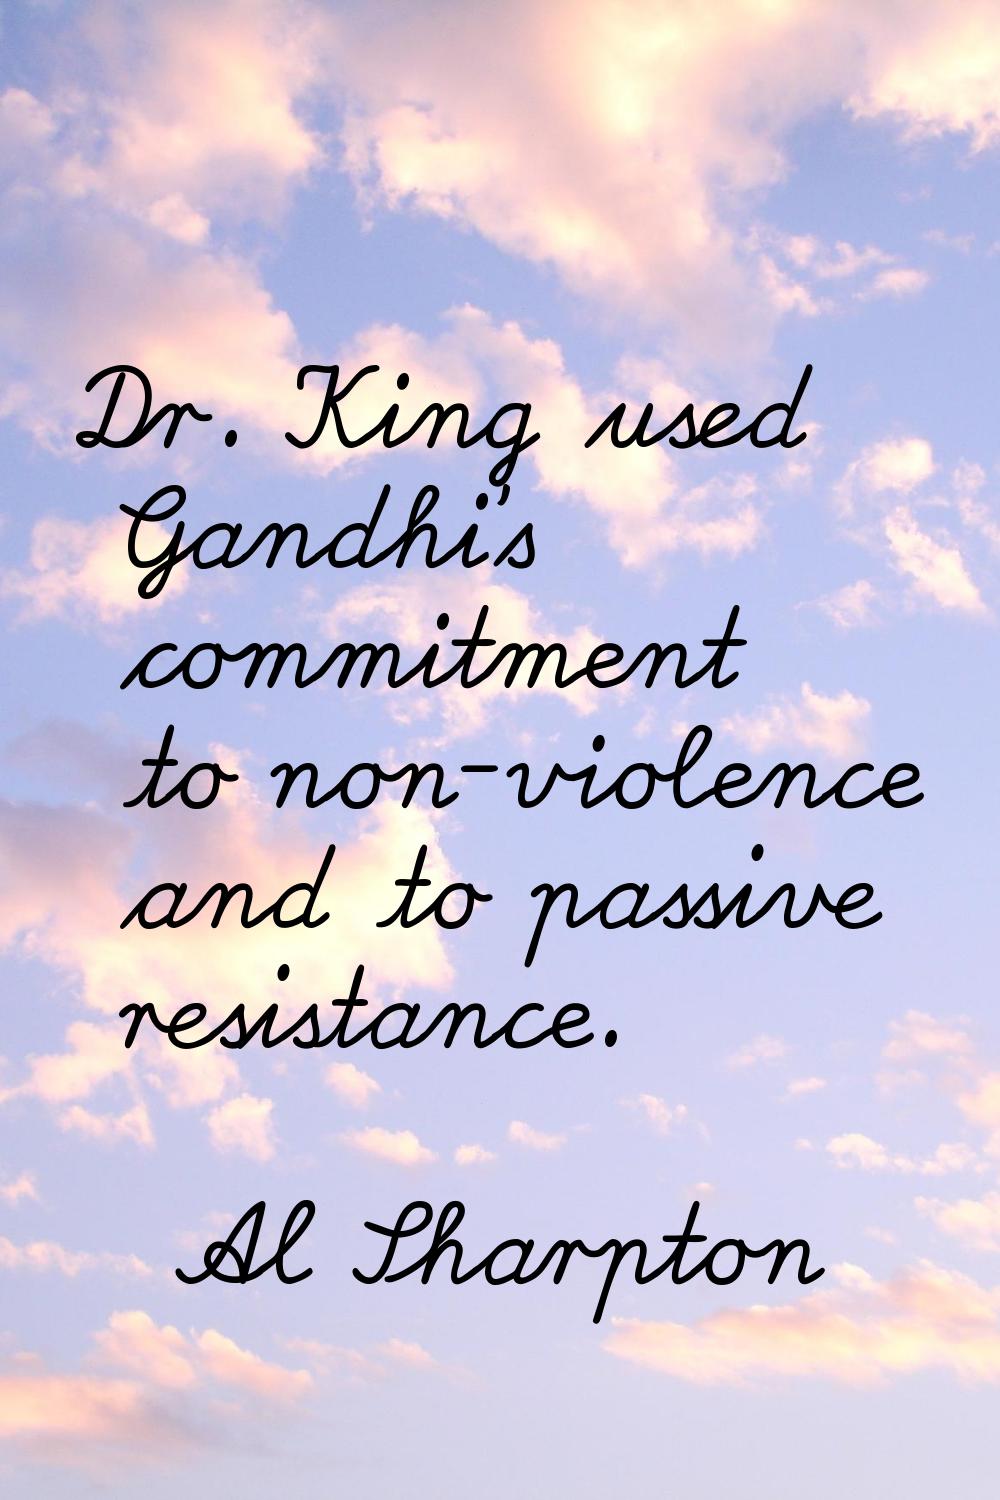 Dr. King used Gandhi's commitment to non-violence and to passive resistance.